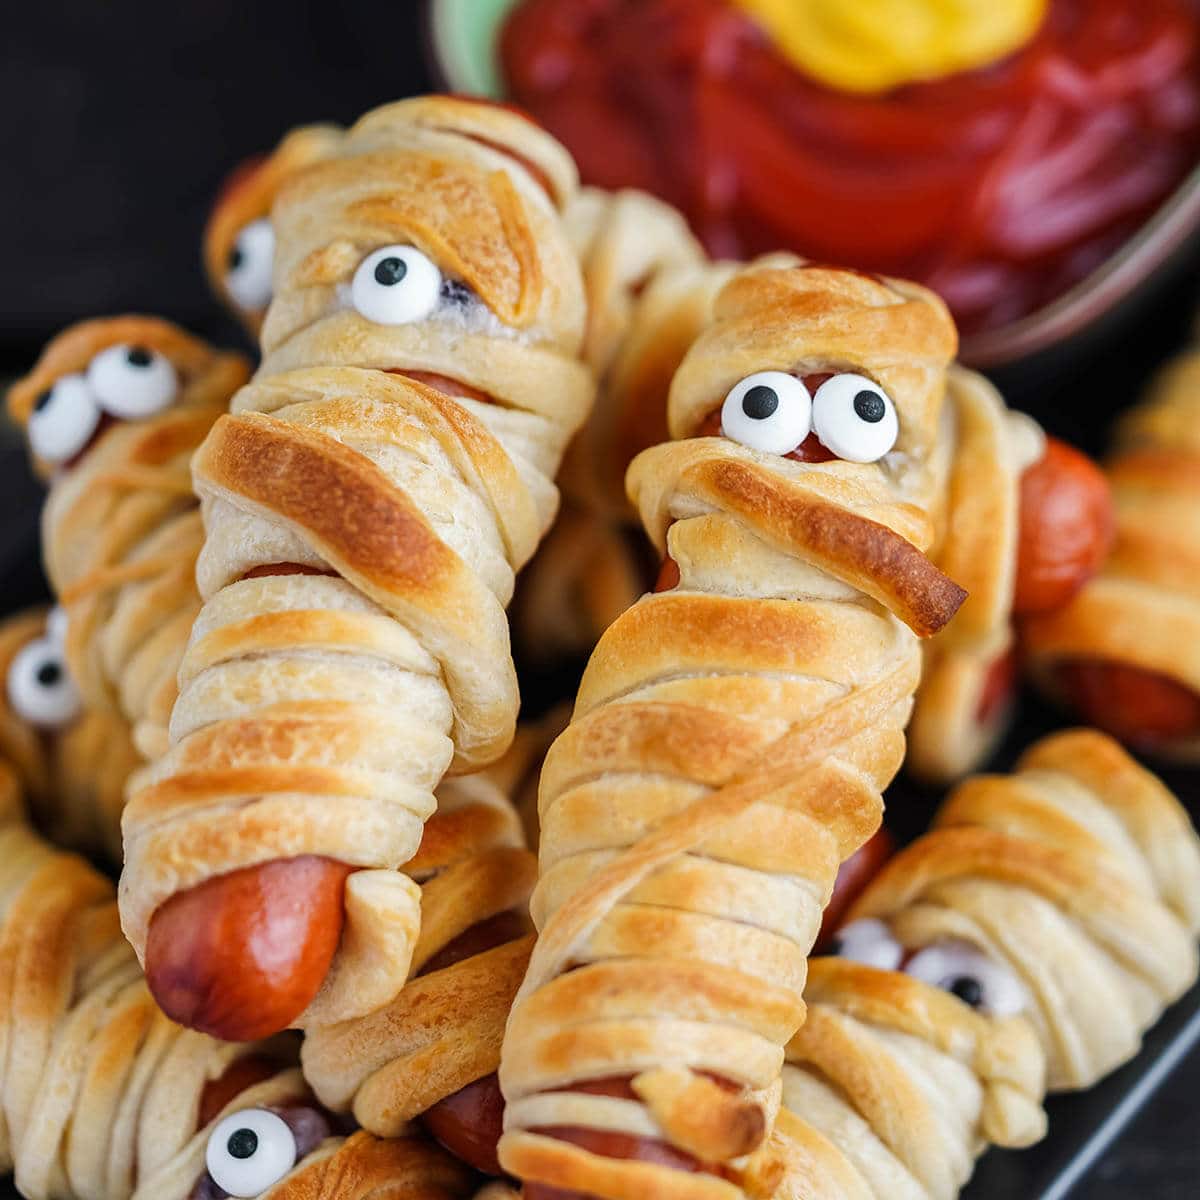 Hot dogs wrapped in crescent rolls on platter.